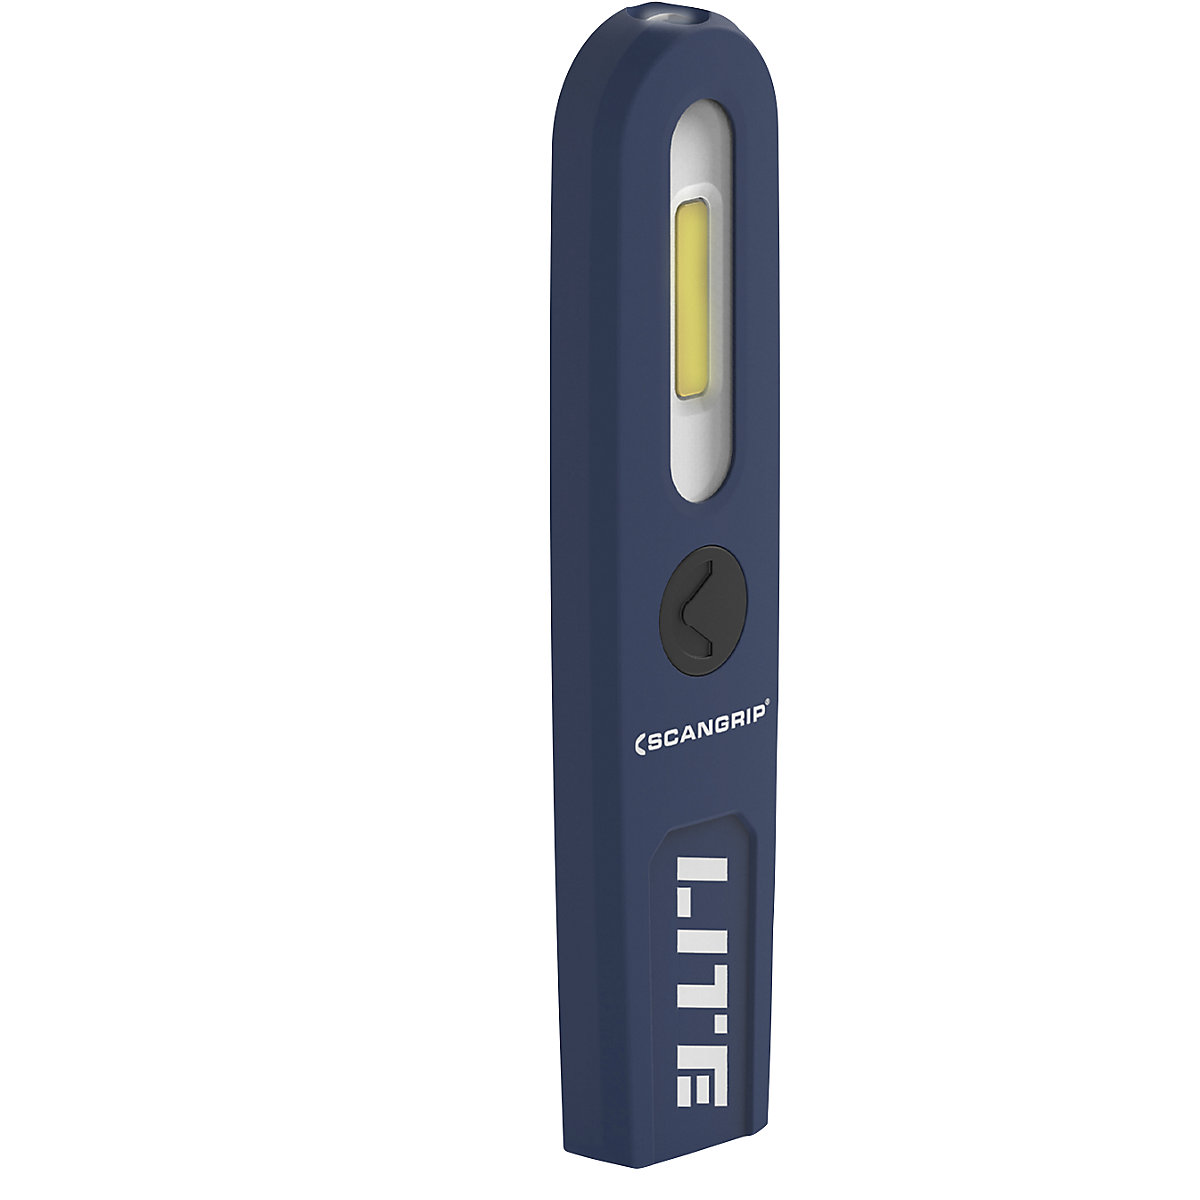 STICK LITE S rechargeable LED hand lamp - SCANGRIP